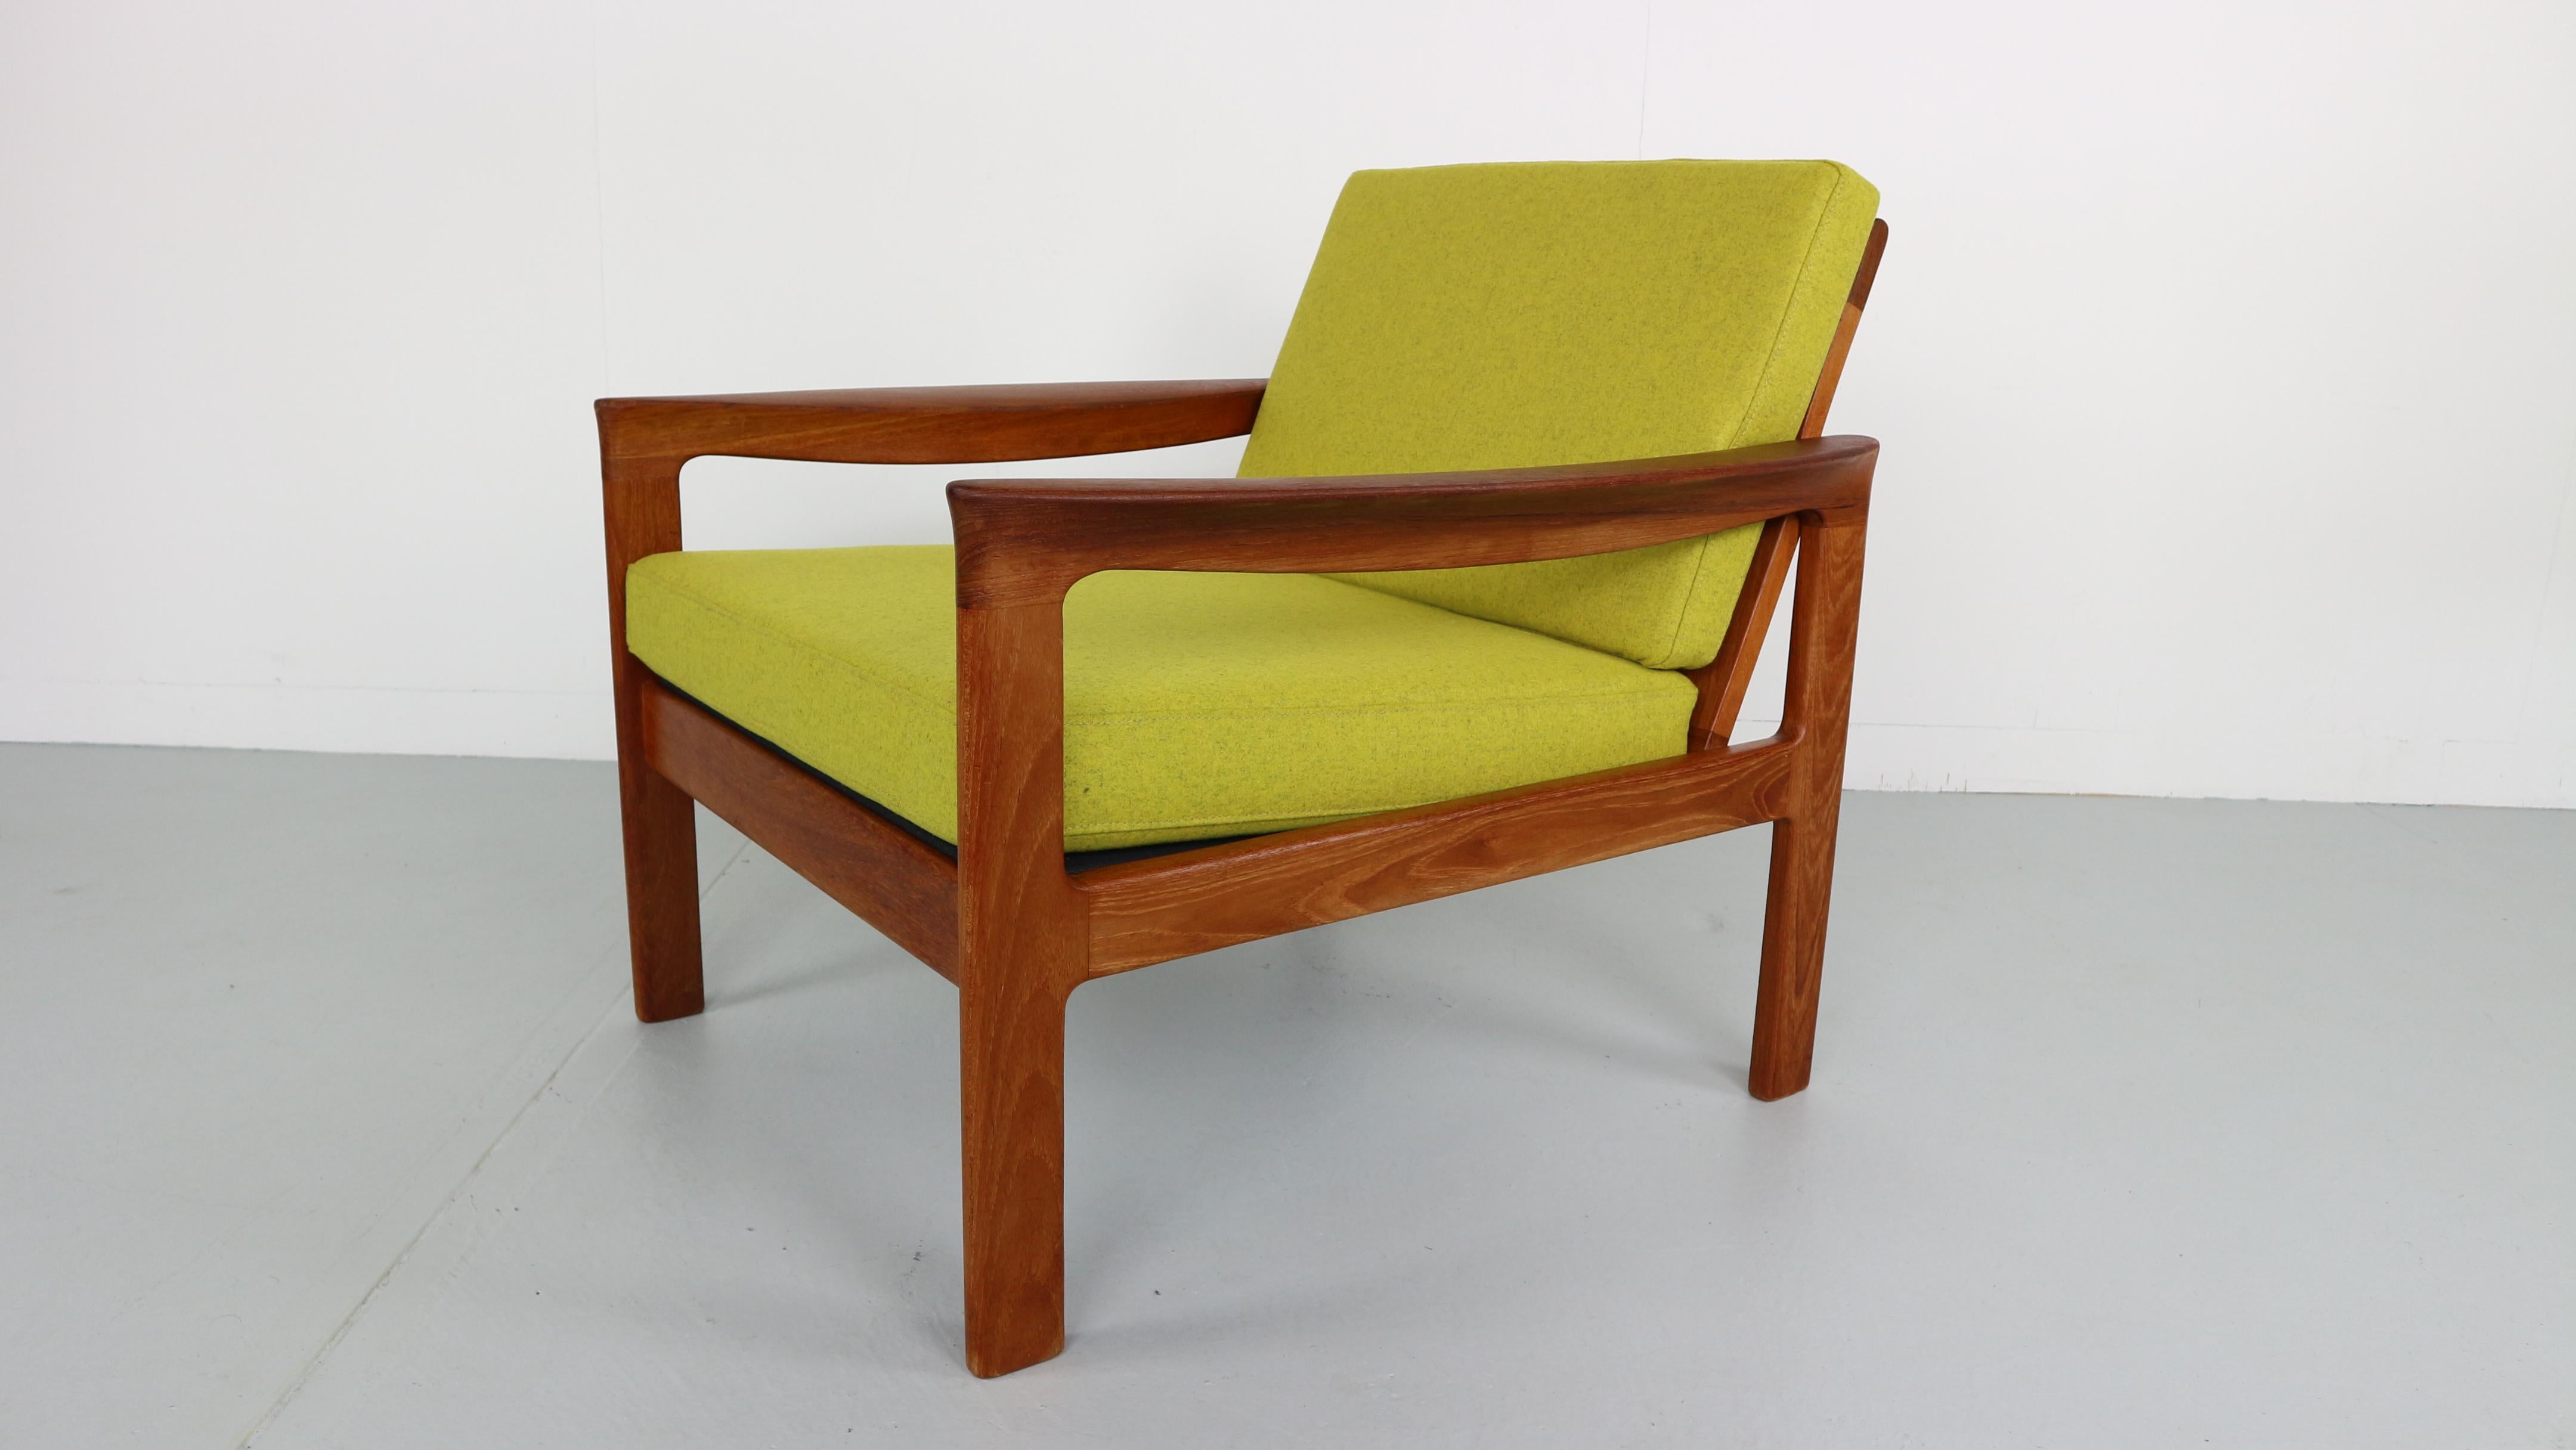 This set of ’Borneo’ lounge chairs ware designed by Sven Ellekaer for Komfort, Denmark in the 1960s. It features a beautiful shaped solid teak frame with new wool upholstery, new webbing and foam. Marked by the maker.